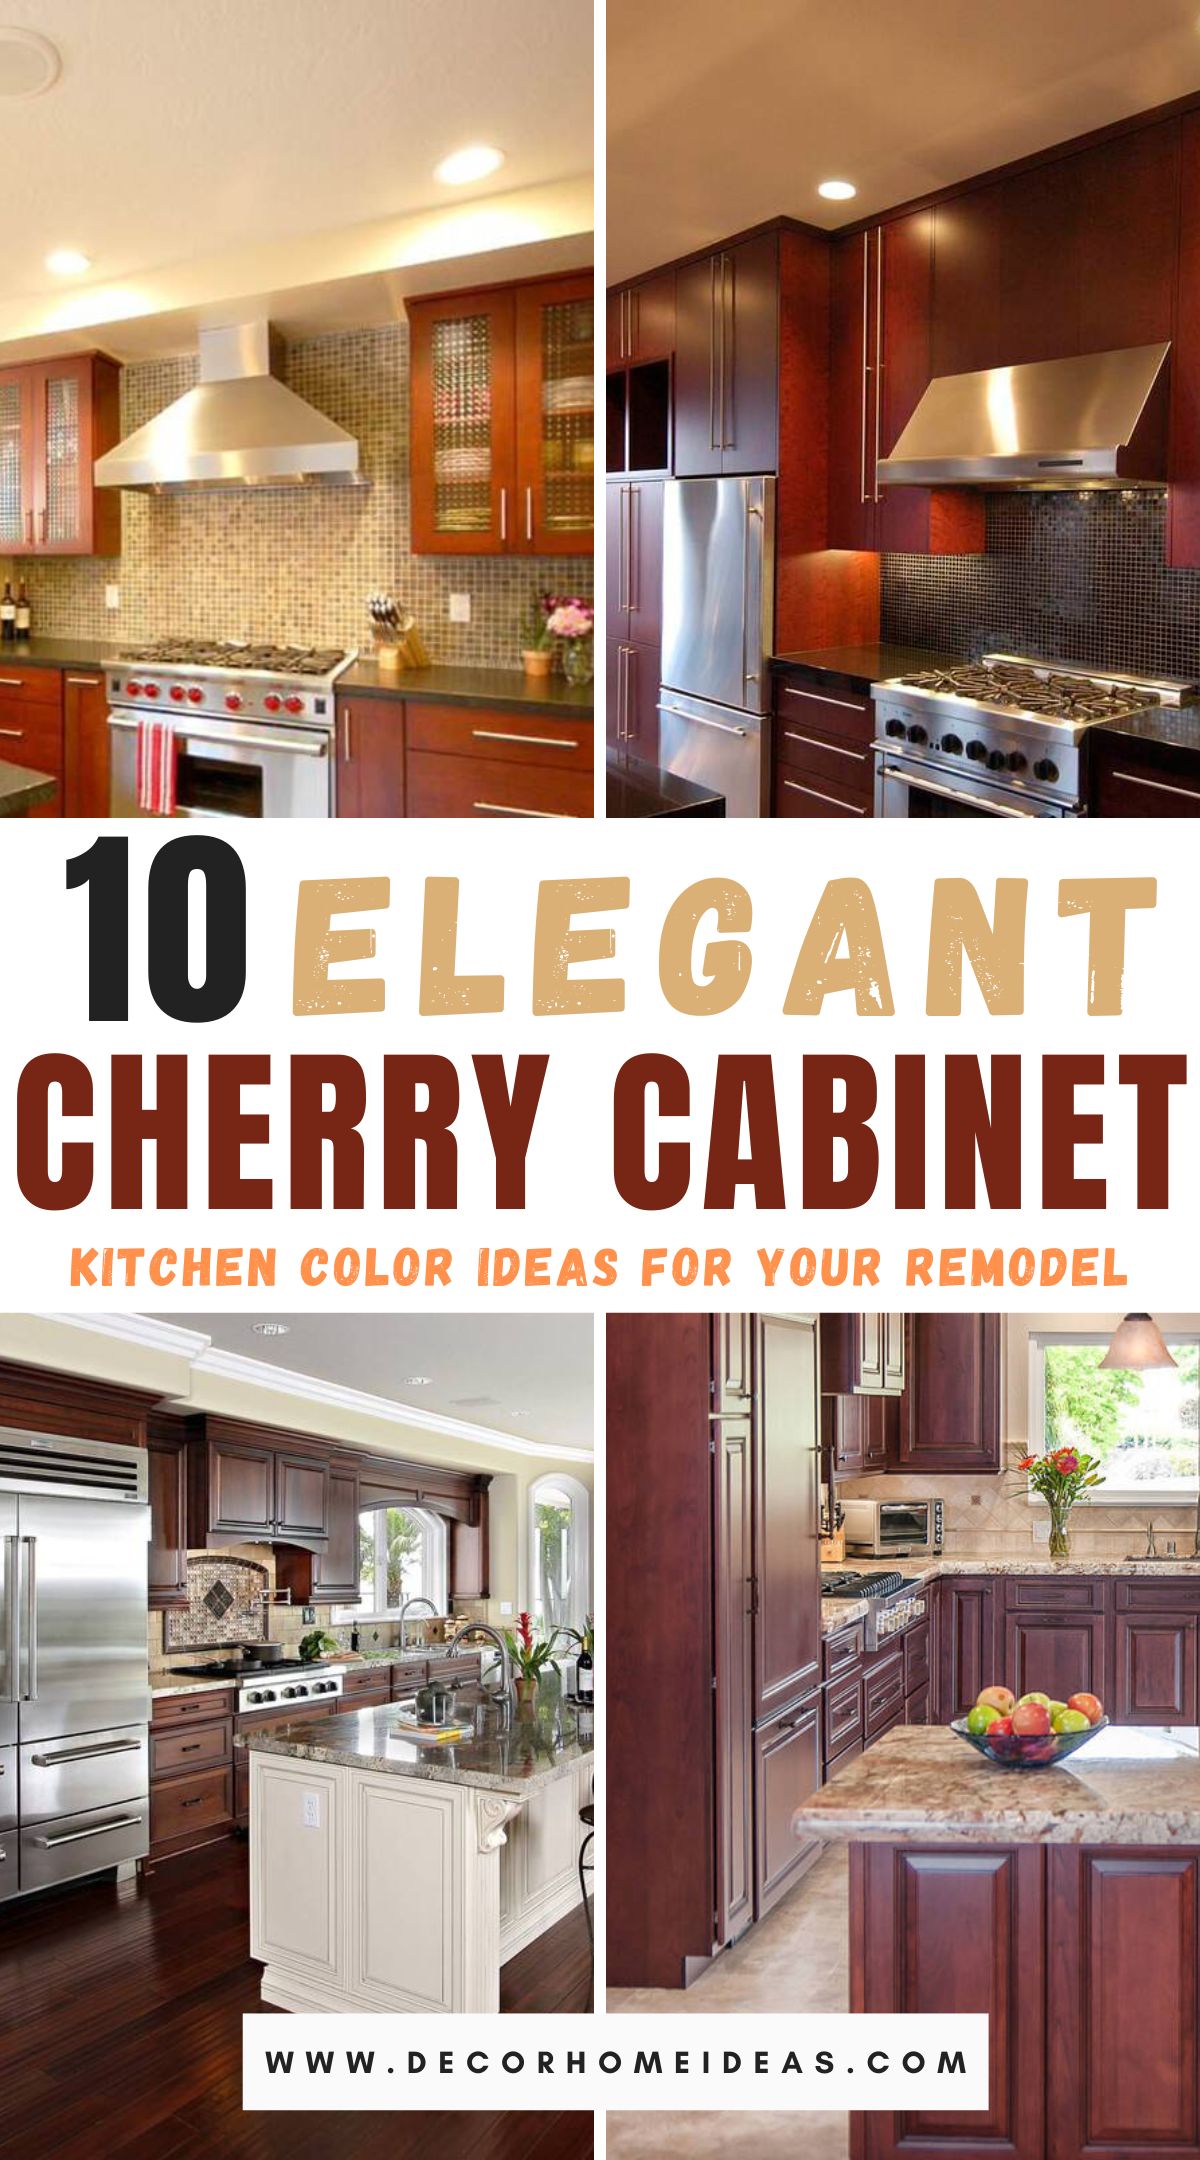 Discover 10 stunning cherry cabinet kitchen color schemes to inspire your next remodel. From classic contrasts to harmonious blends, explore a variety of captivating palettes that will complement the warmth and richness of cherry wood, transforming your kitchen into a stylish and inviting space.